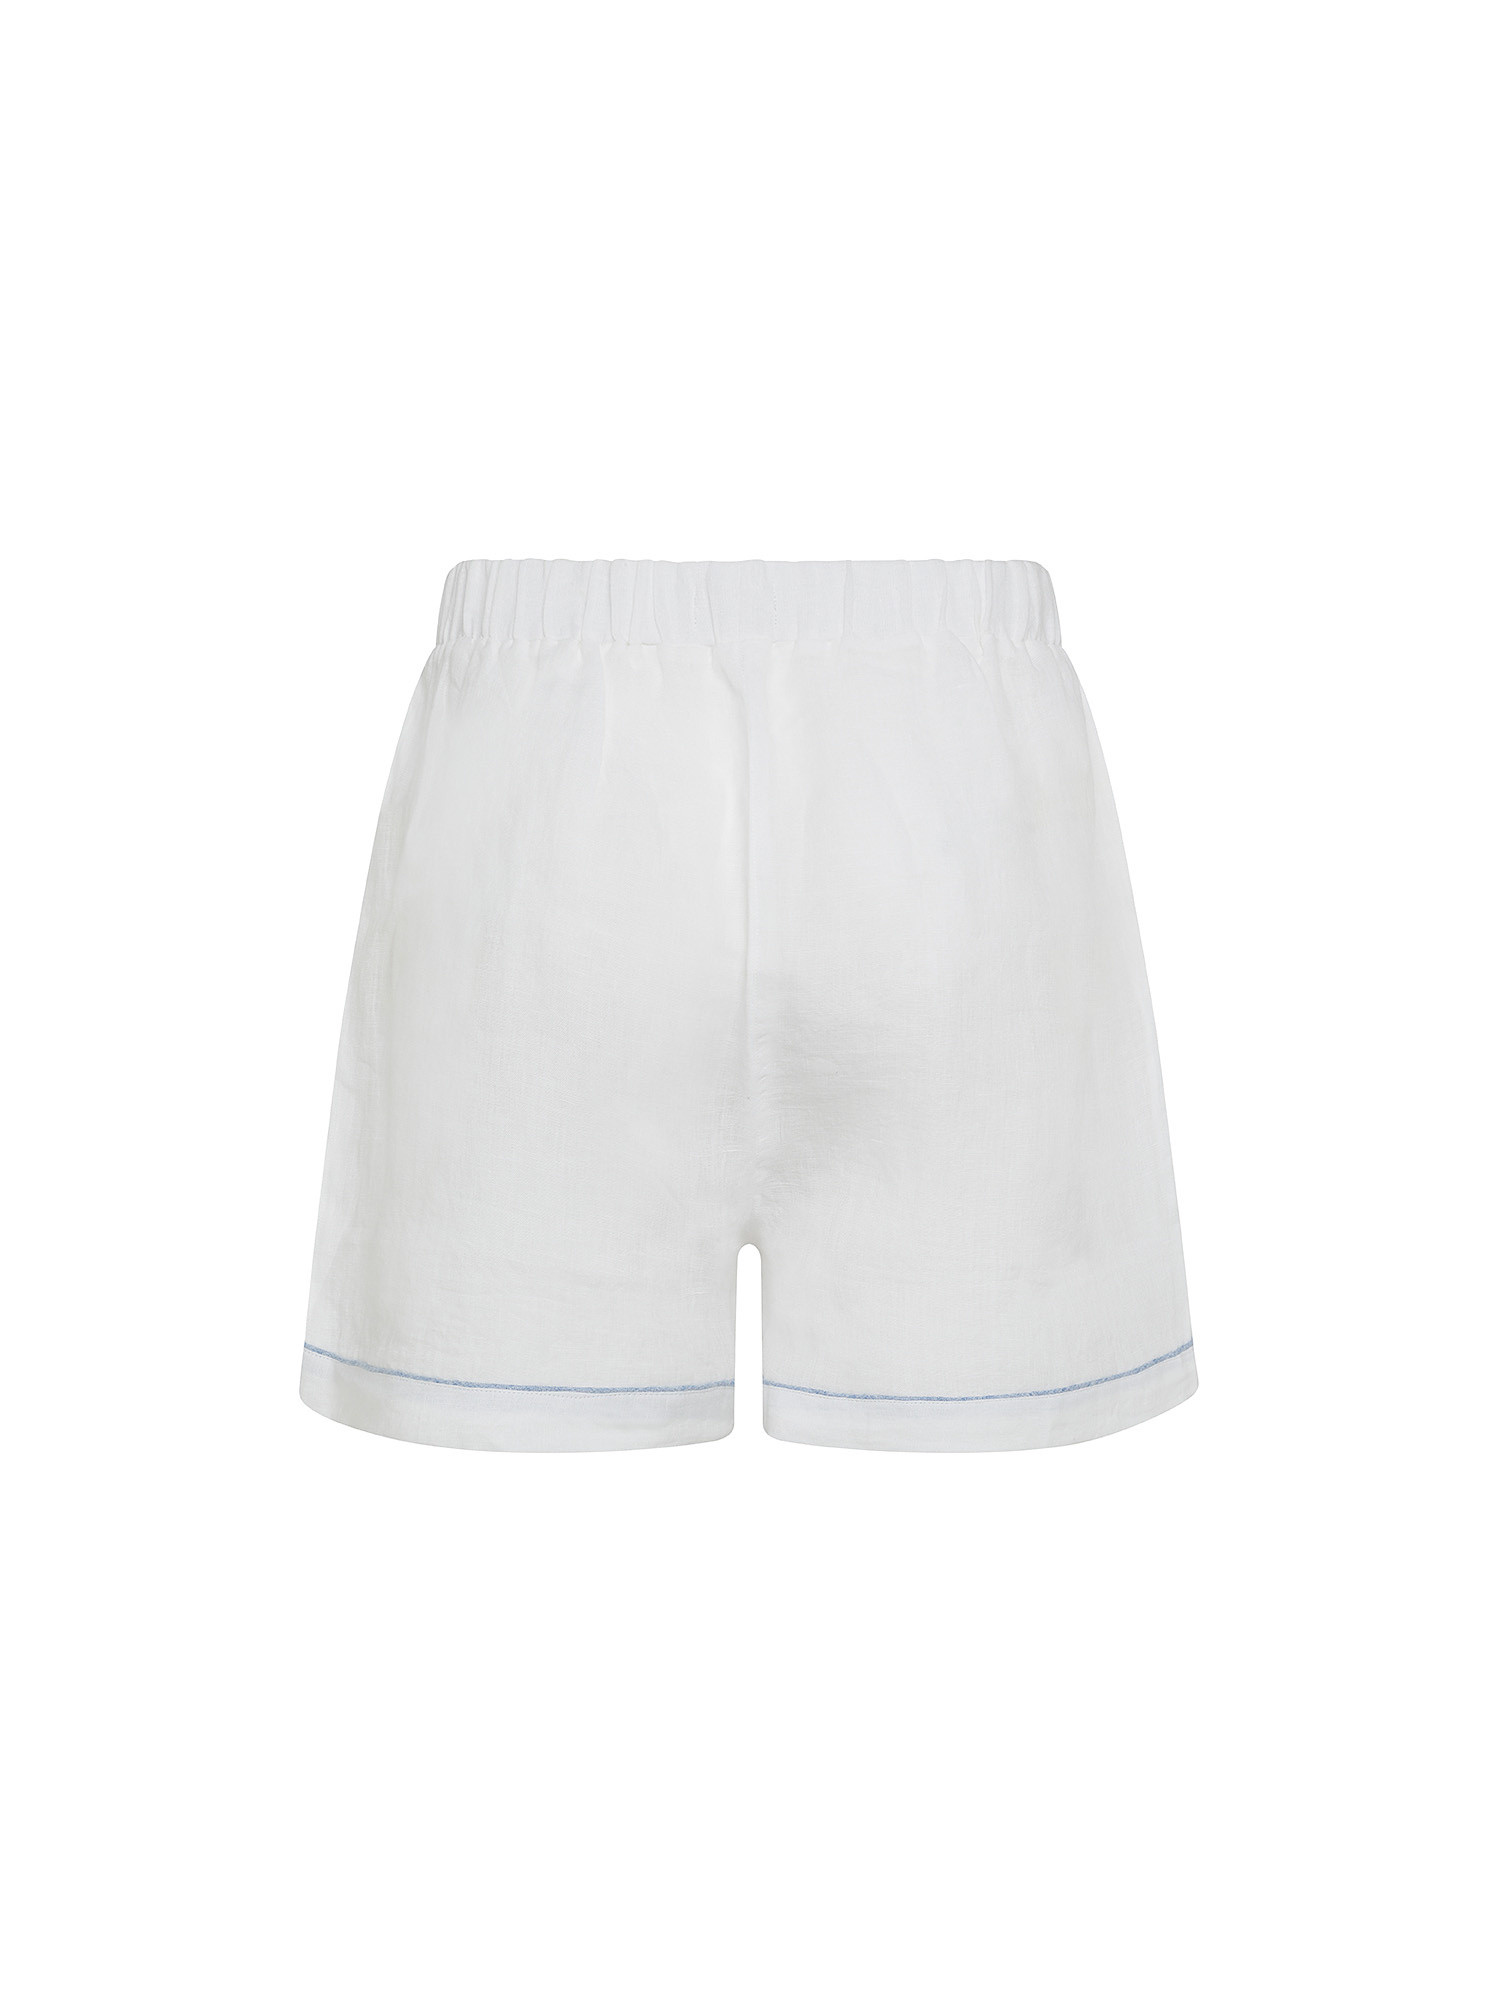 Solid color 100% linen pajama shorts, White, large image number 1